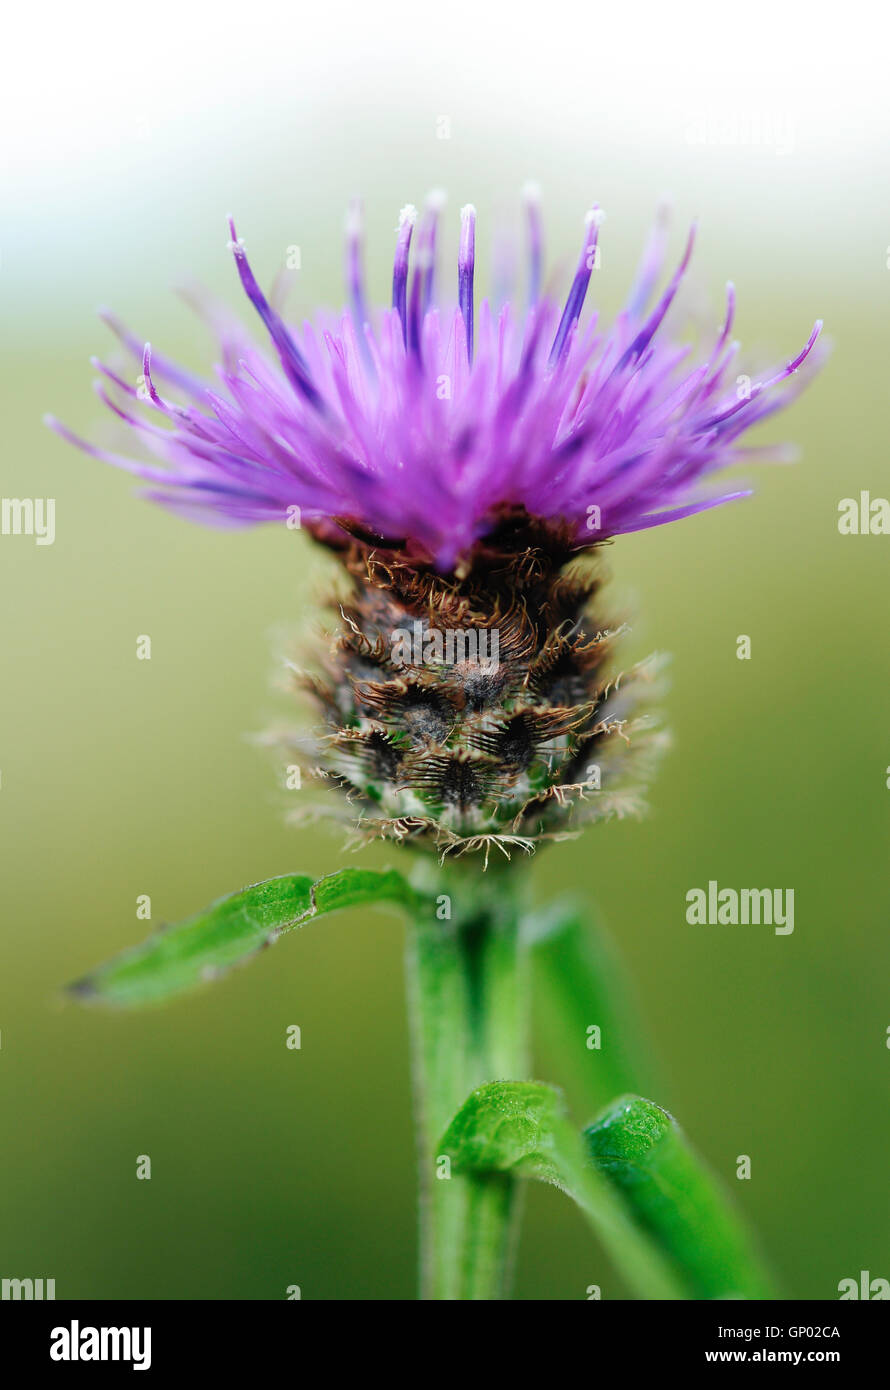 Close up of a Knapweed (Centaurea Nigra) flower with bristly bud and green stem. Stock Photo